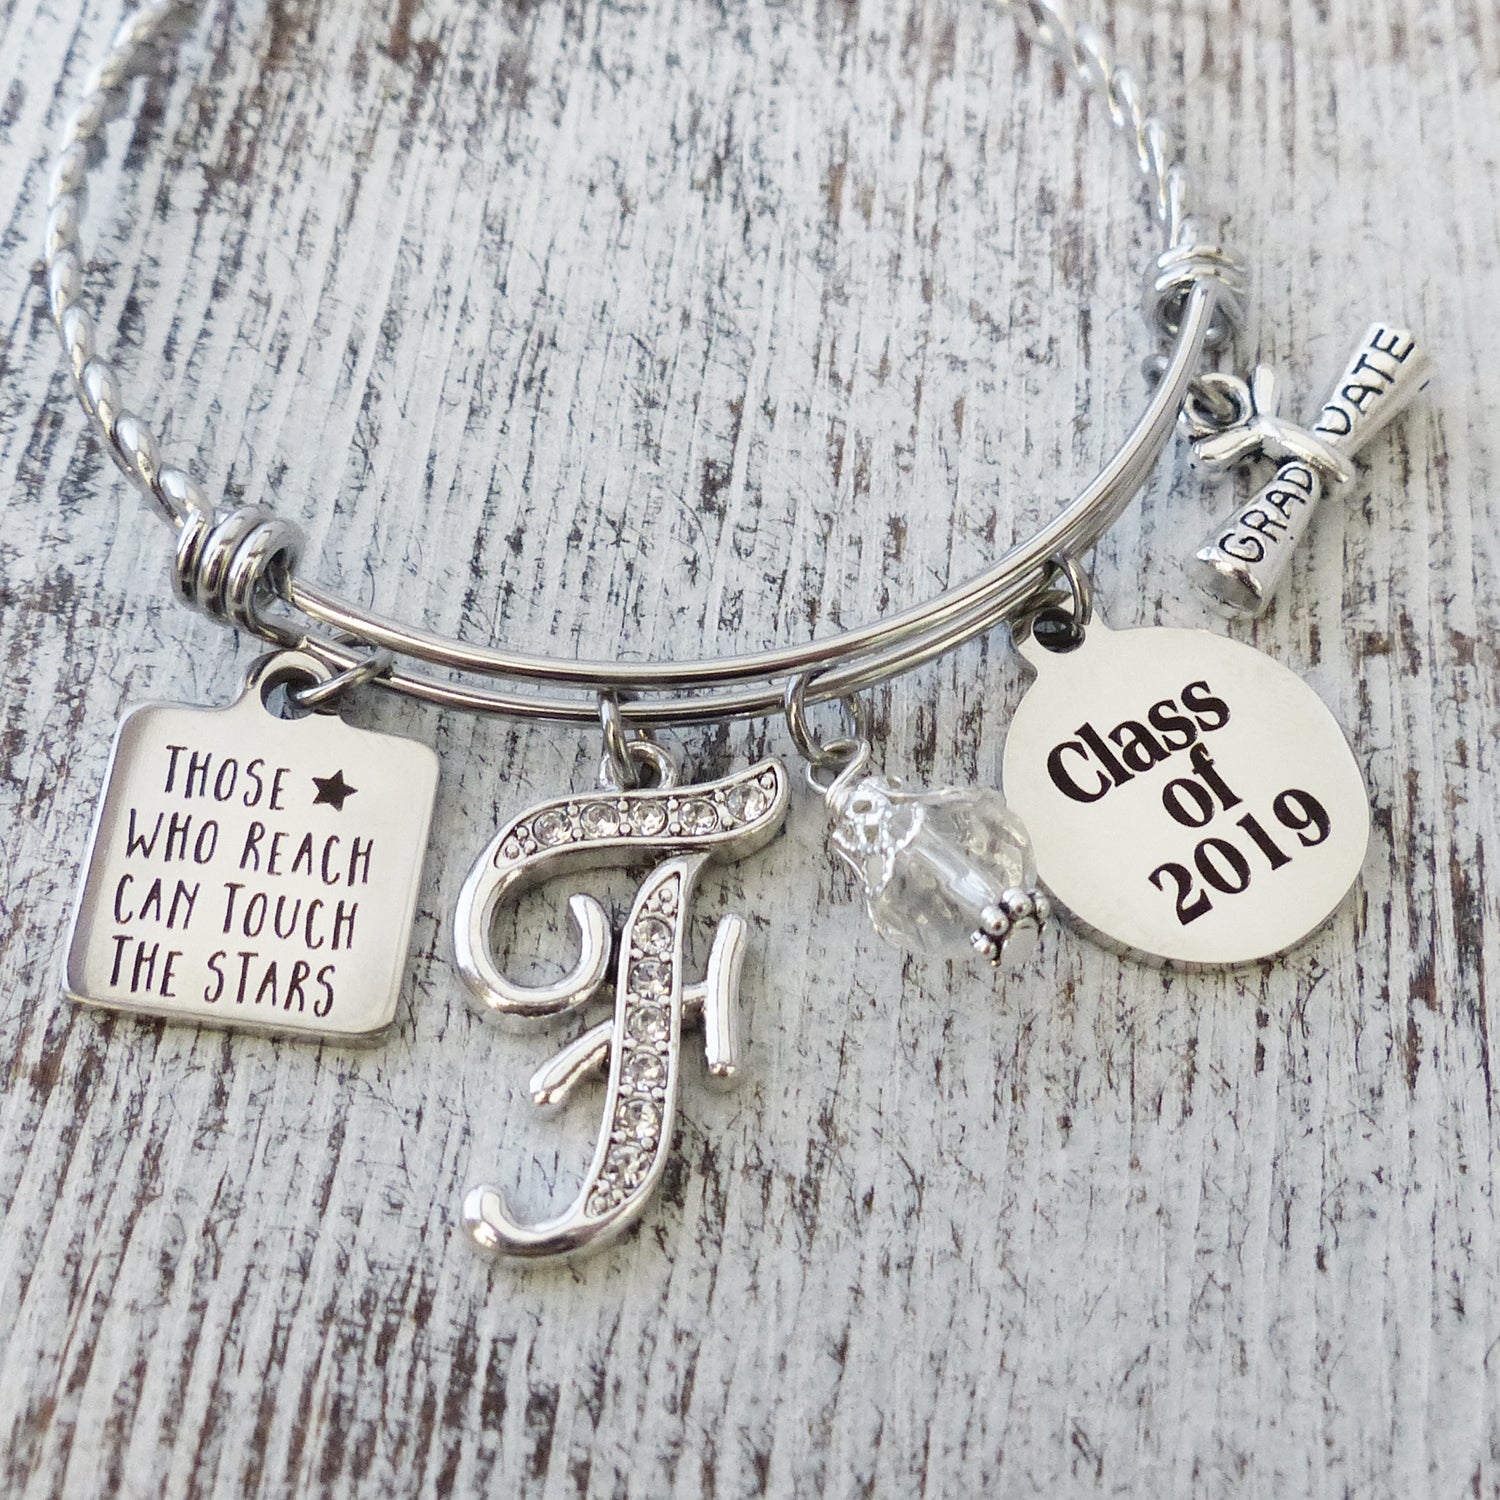 Class of 2024 Graduation Gifts-Those who reach can touch the stars-Personalized jewelry gifts for Graduate-Grad Bracelet- College Grad Gift Senior